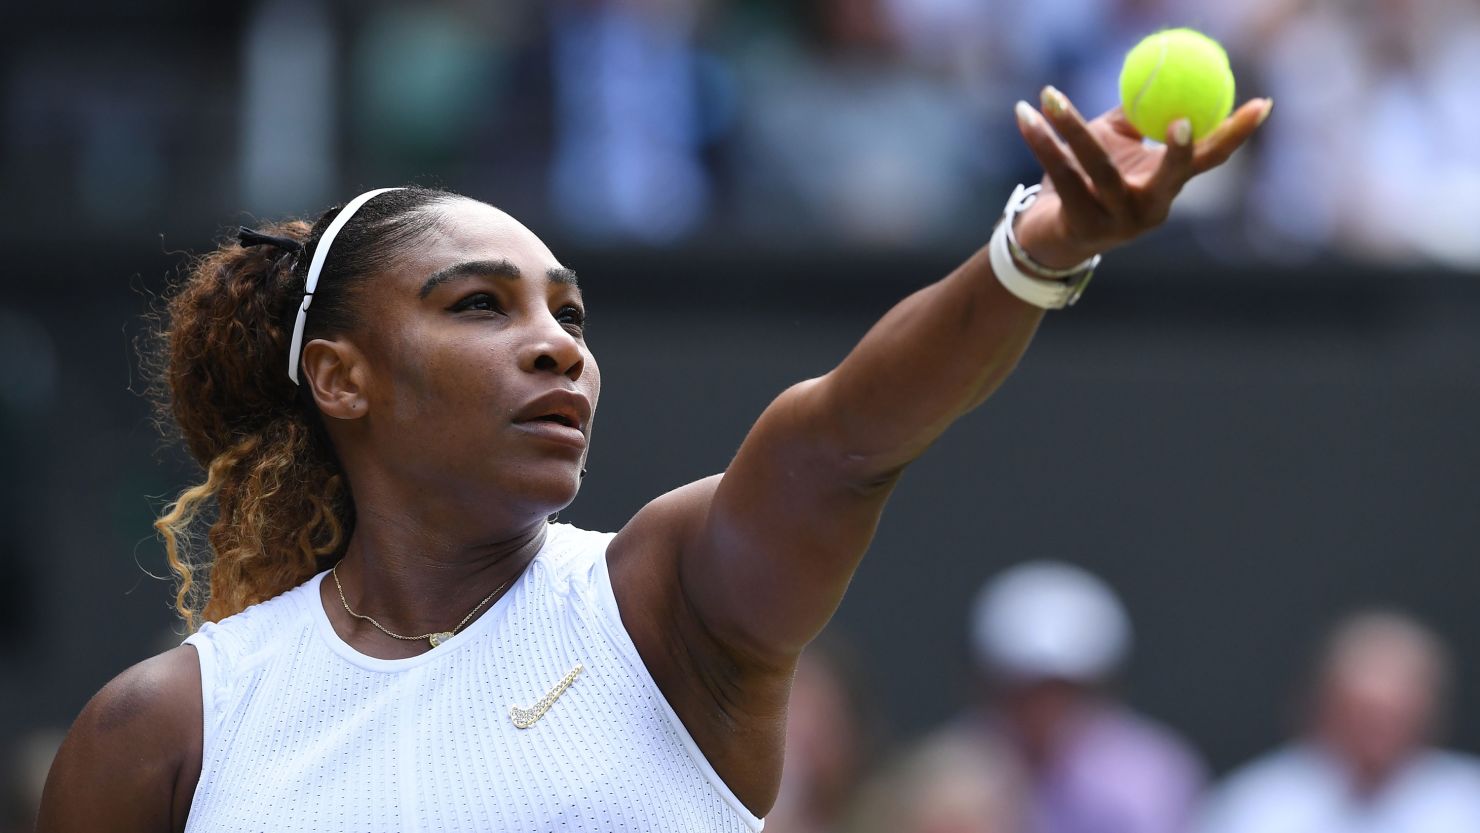 Serena Williams seeks her 24th major title, which would tie her for the most all time with Margaret Court.